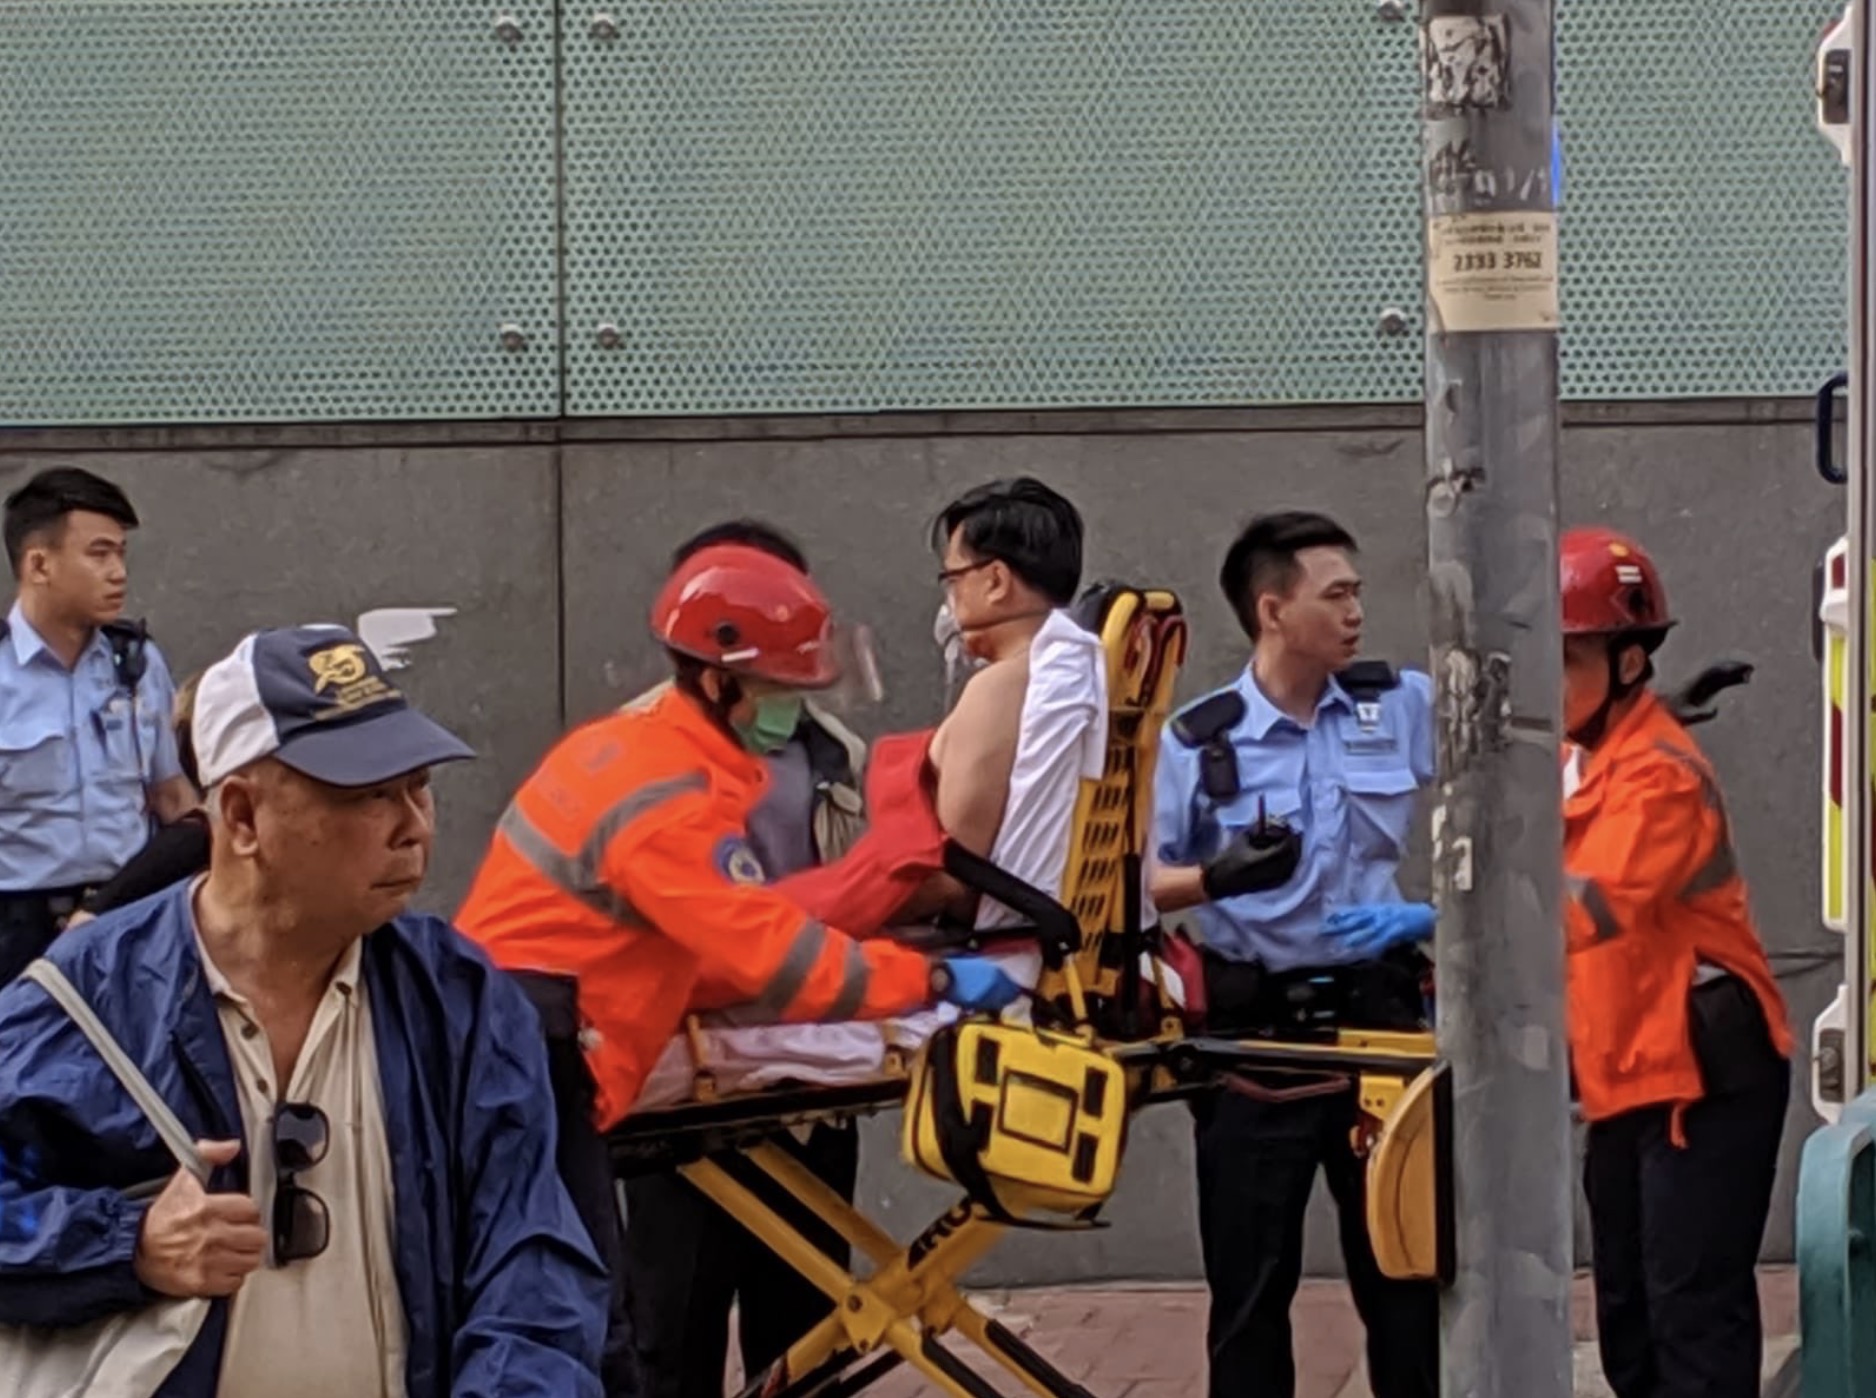 Pro-Beijing lawmaker Junius Ho being taken away in an ambulance after being stabbed while canvassing in Tuen Mun. Photos via Twitter/Galileo Cheng.